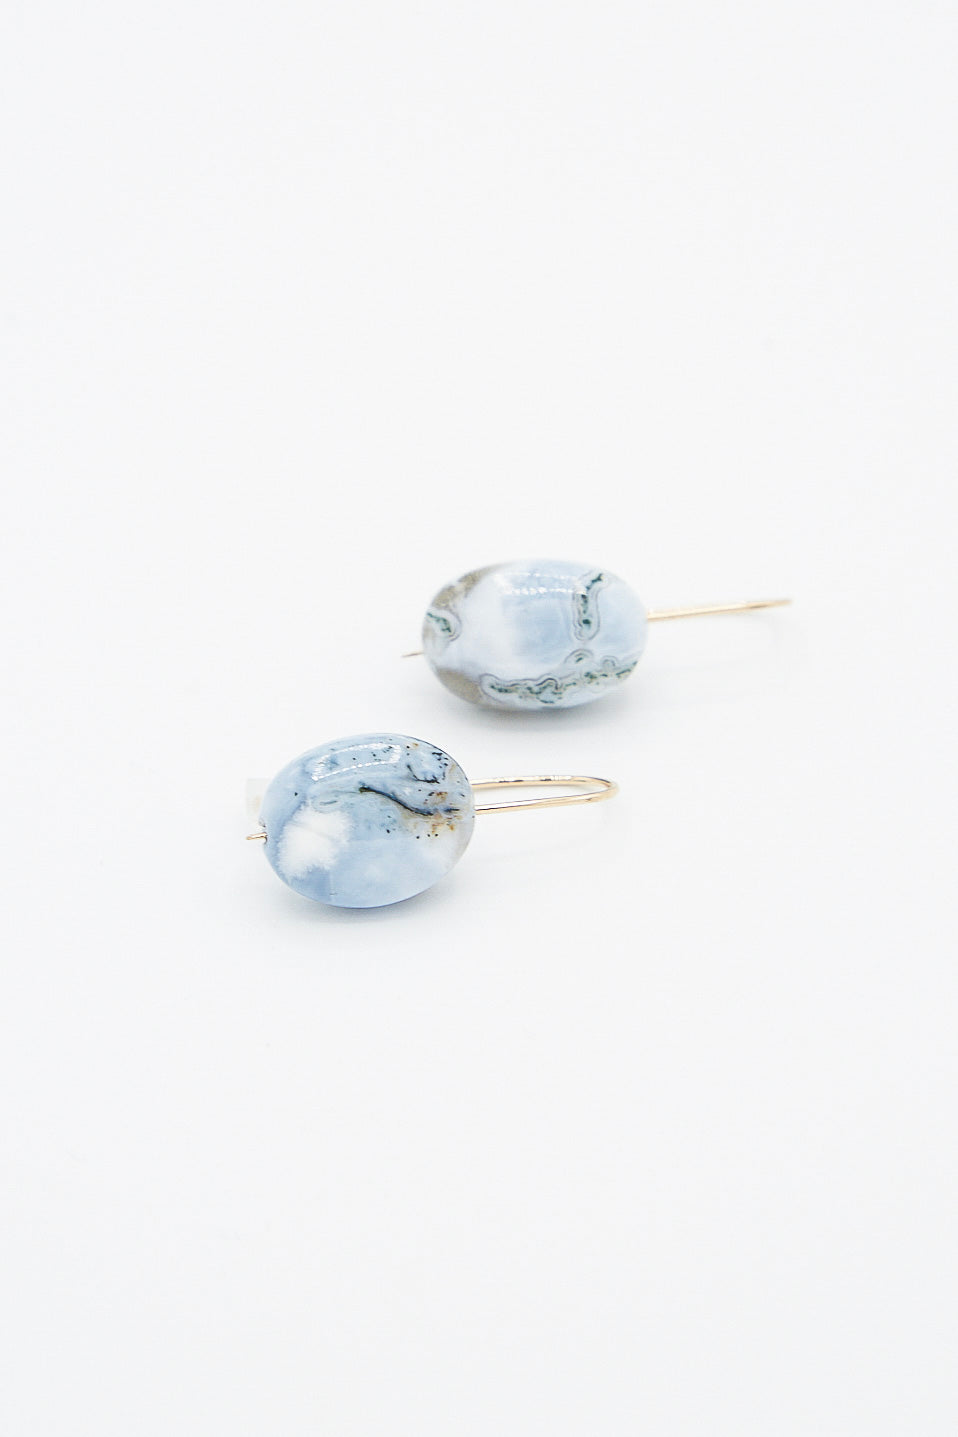 A pair of Mary MacGill Textured Blue Opal drop earrings on a white surface. Available at Oroboro Store.